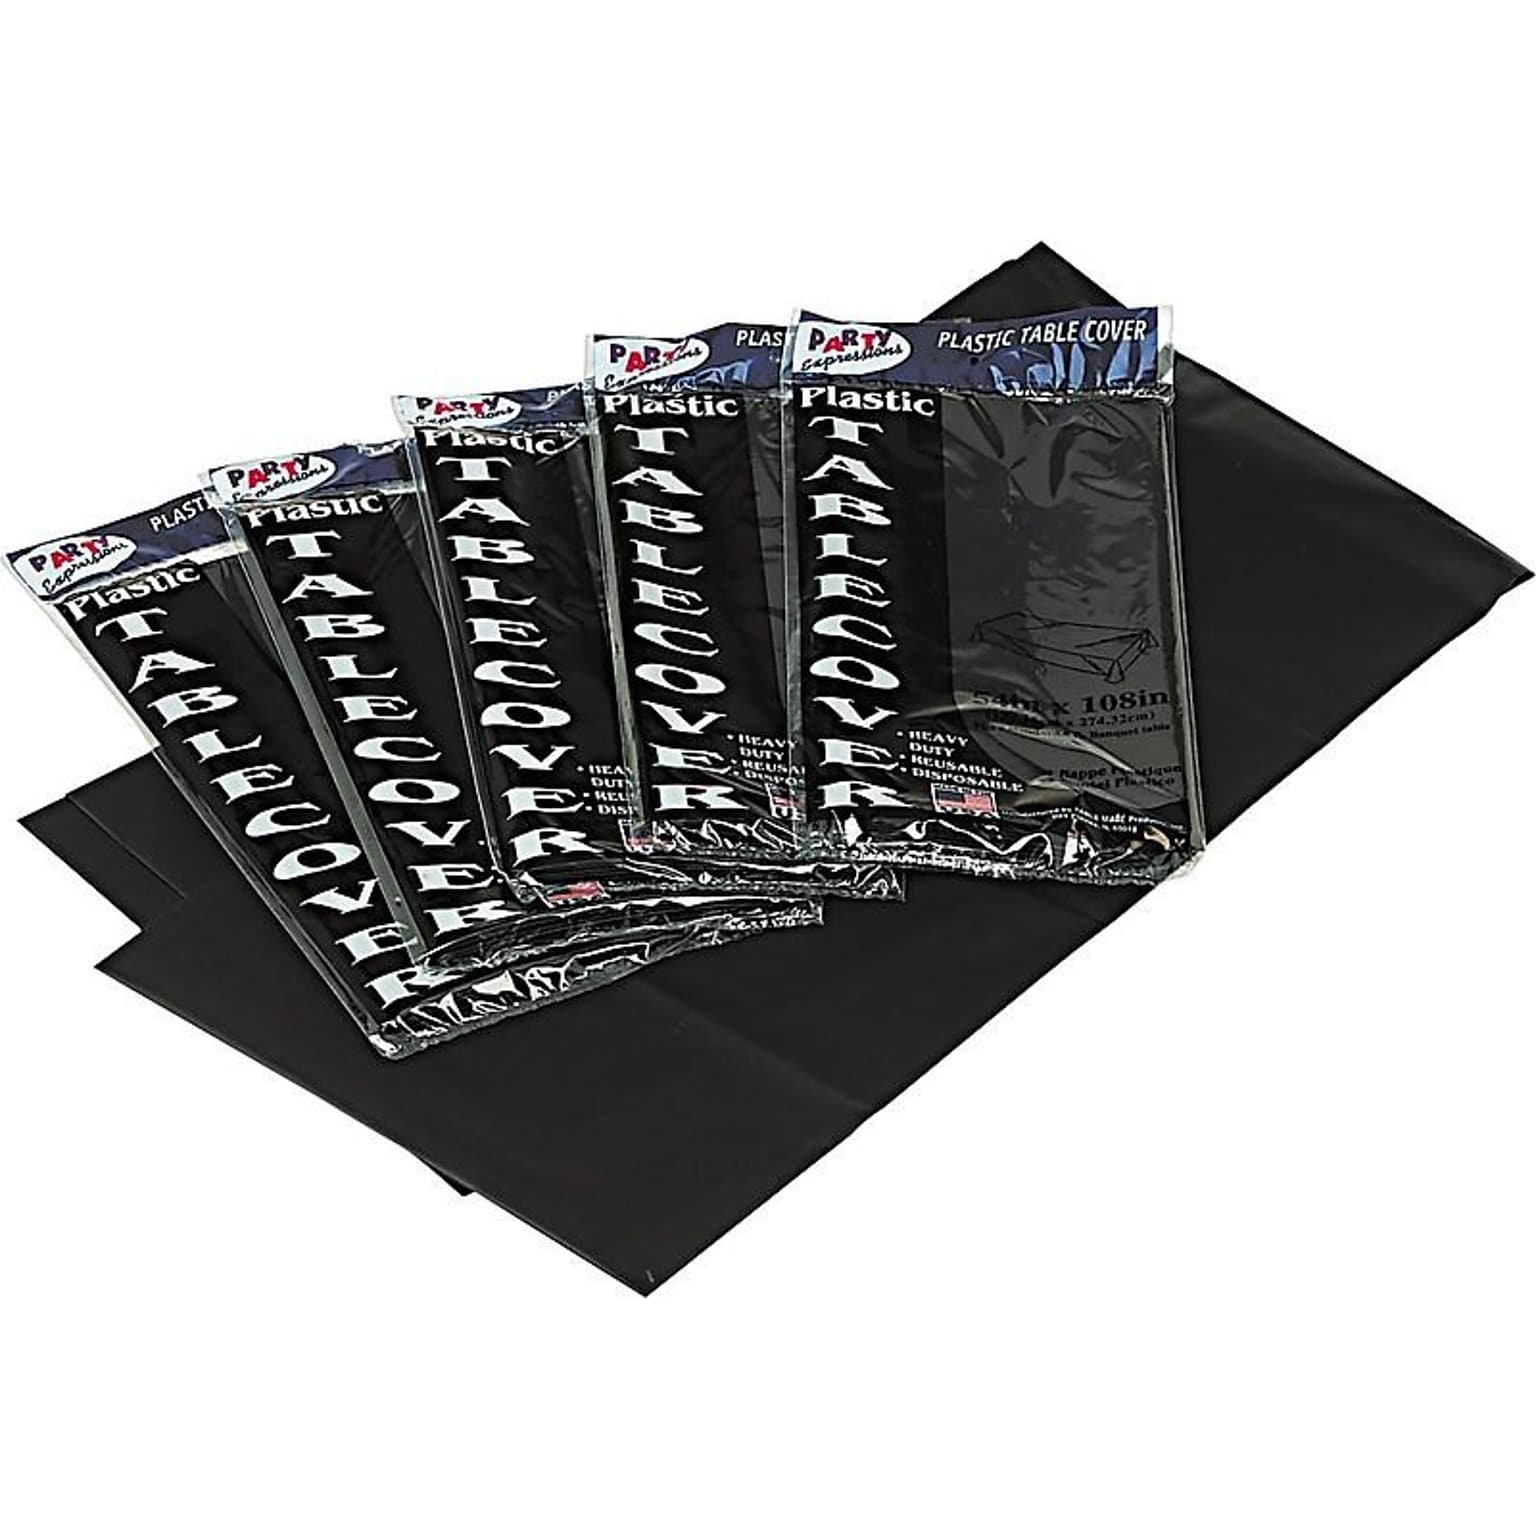 Tablemate Heavy Duty 108W x 54D Solid Table Cover, Black, 6/Pack (TBL-549-BK)